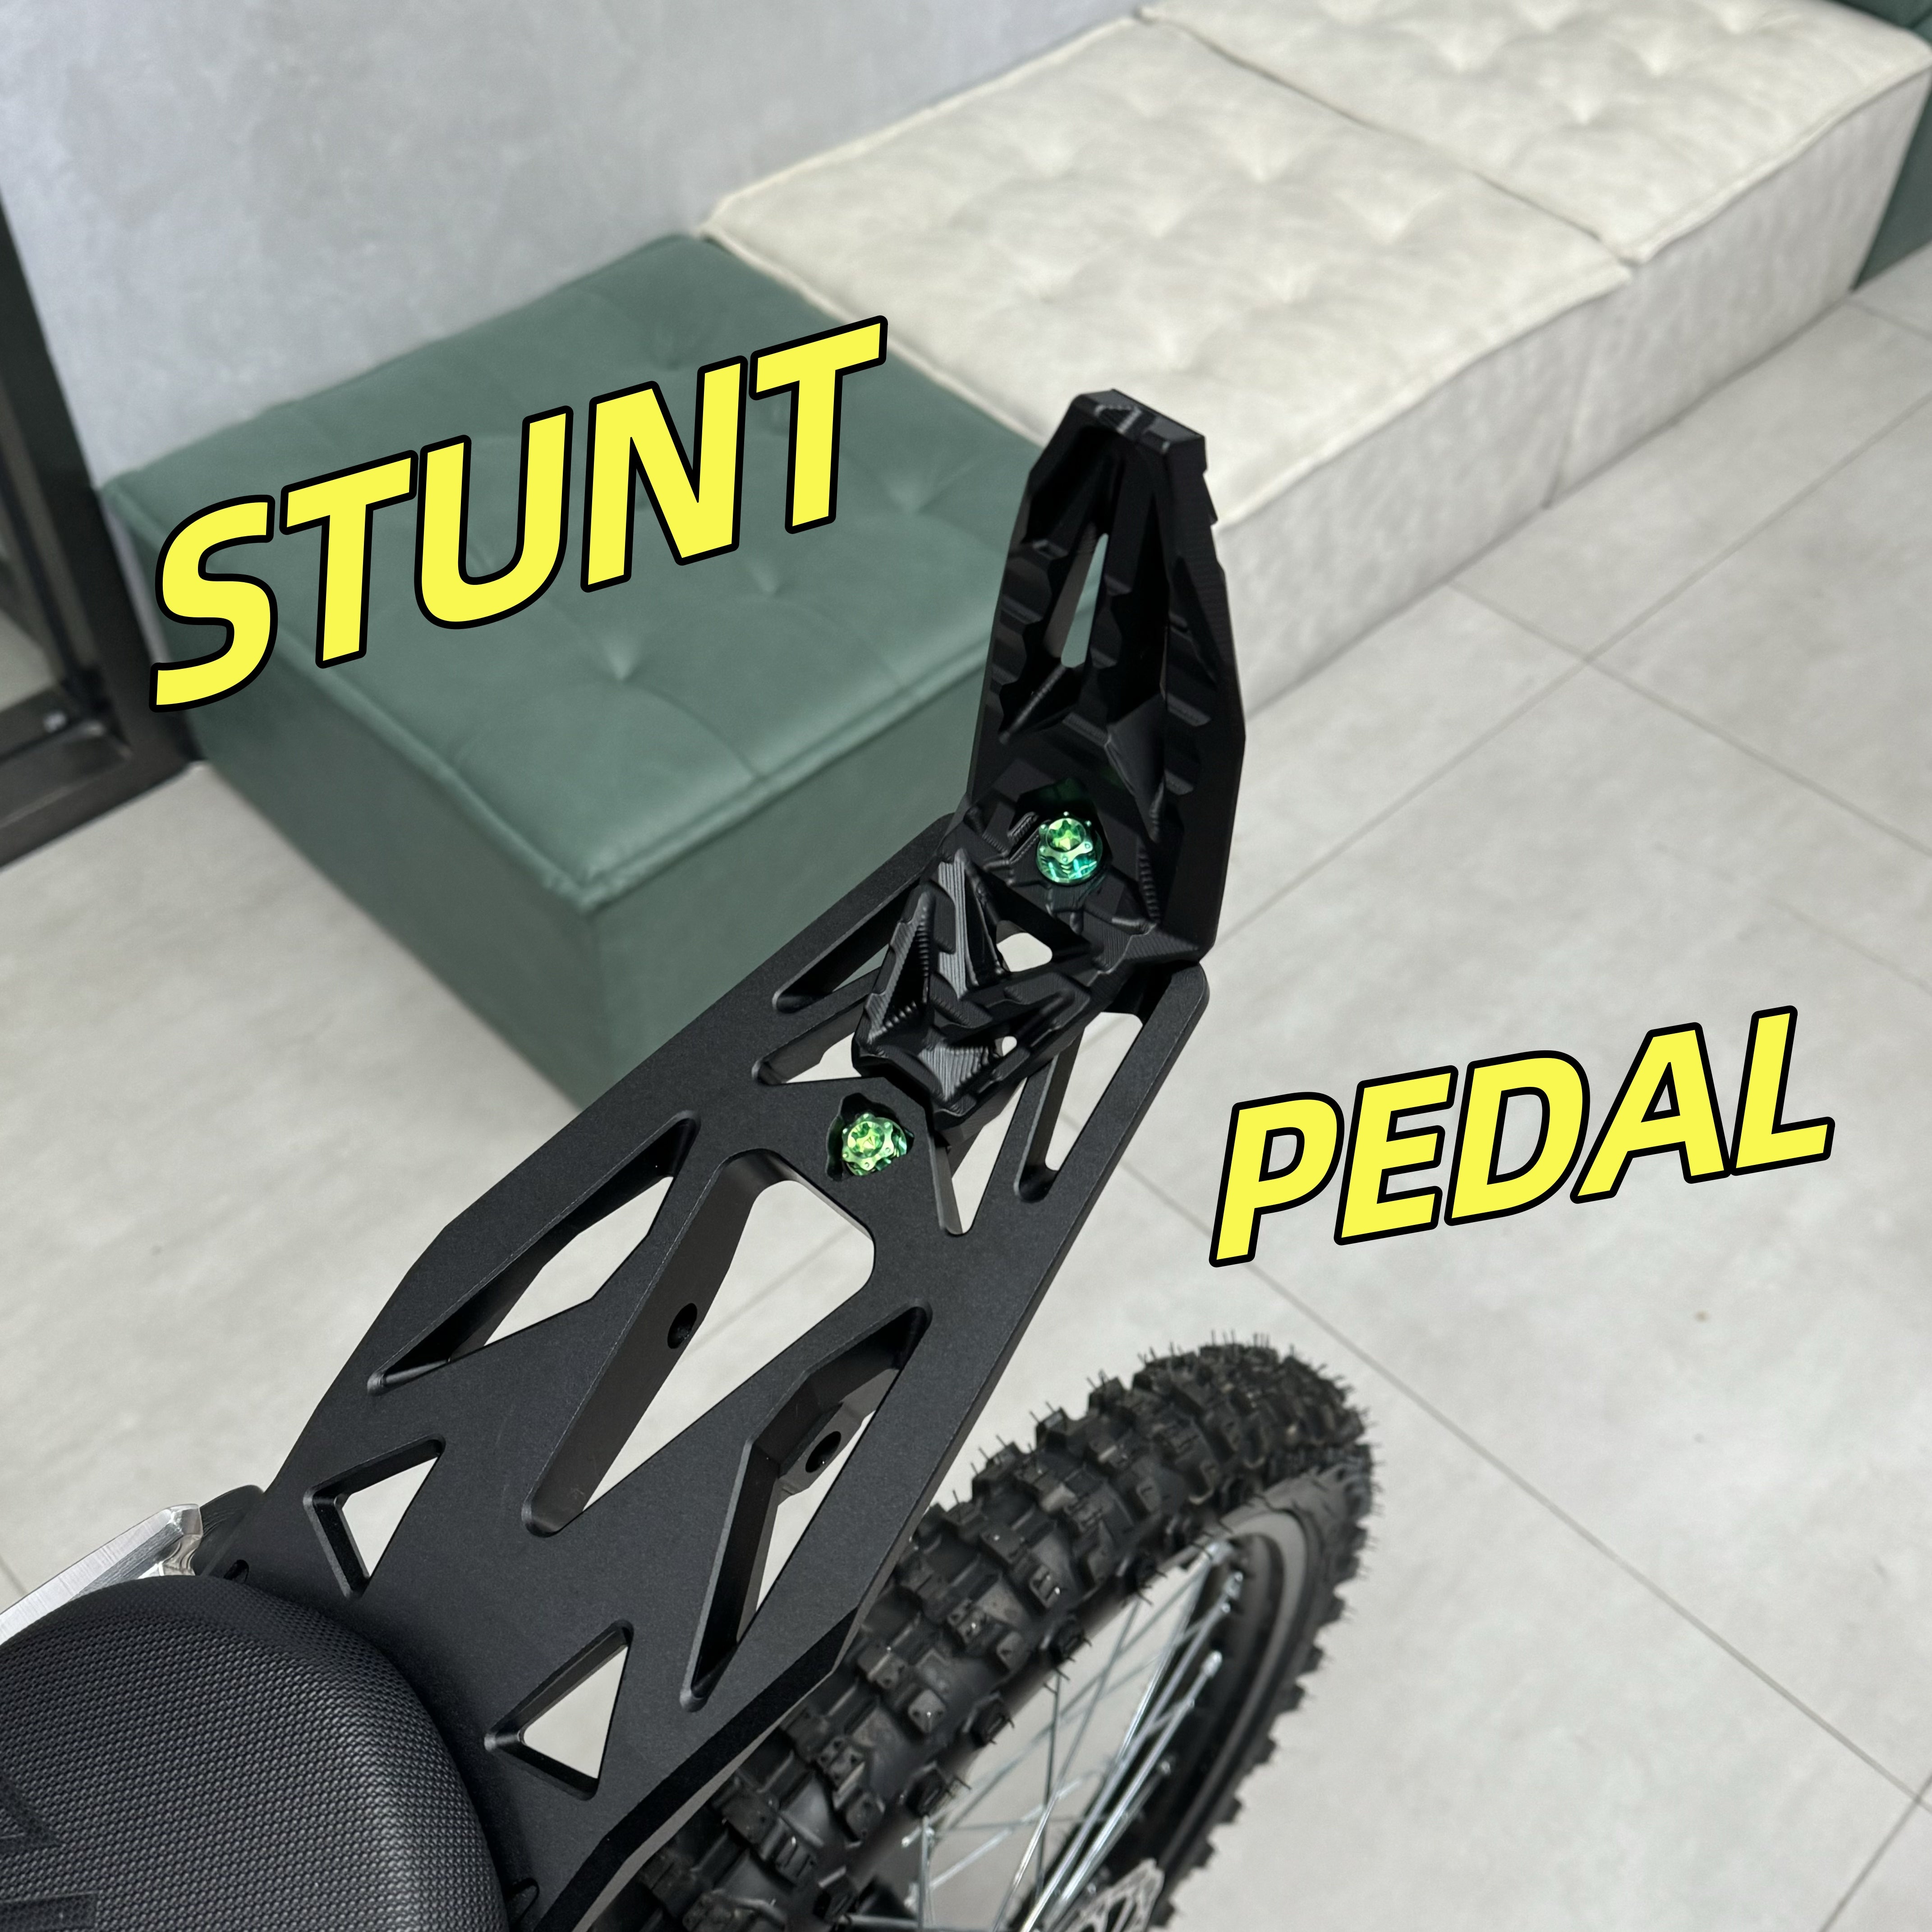 The stunt pedal has been oxidized. What color do you like?